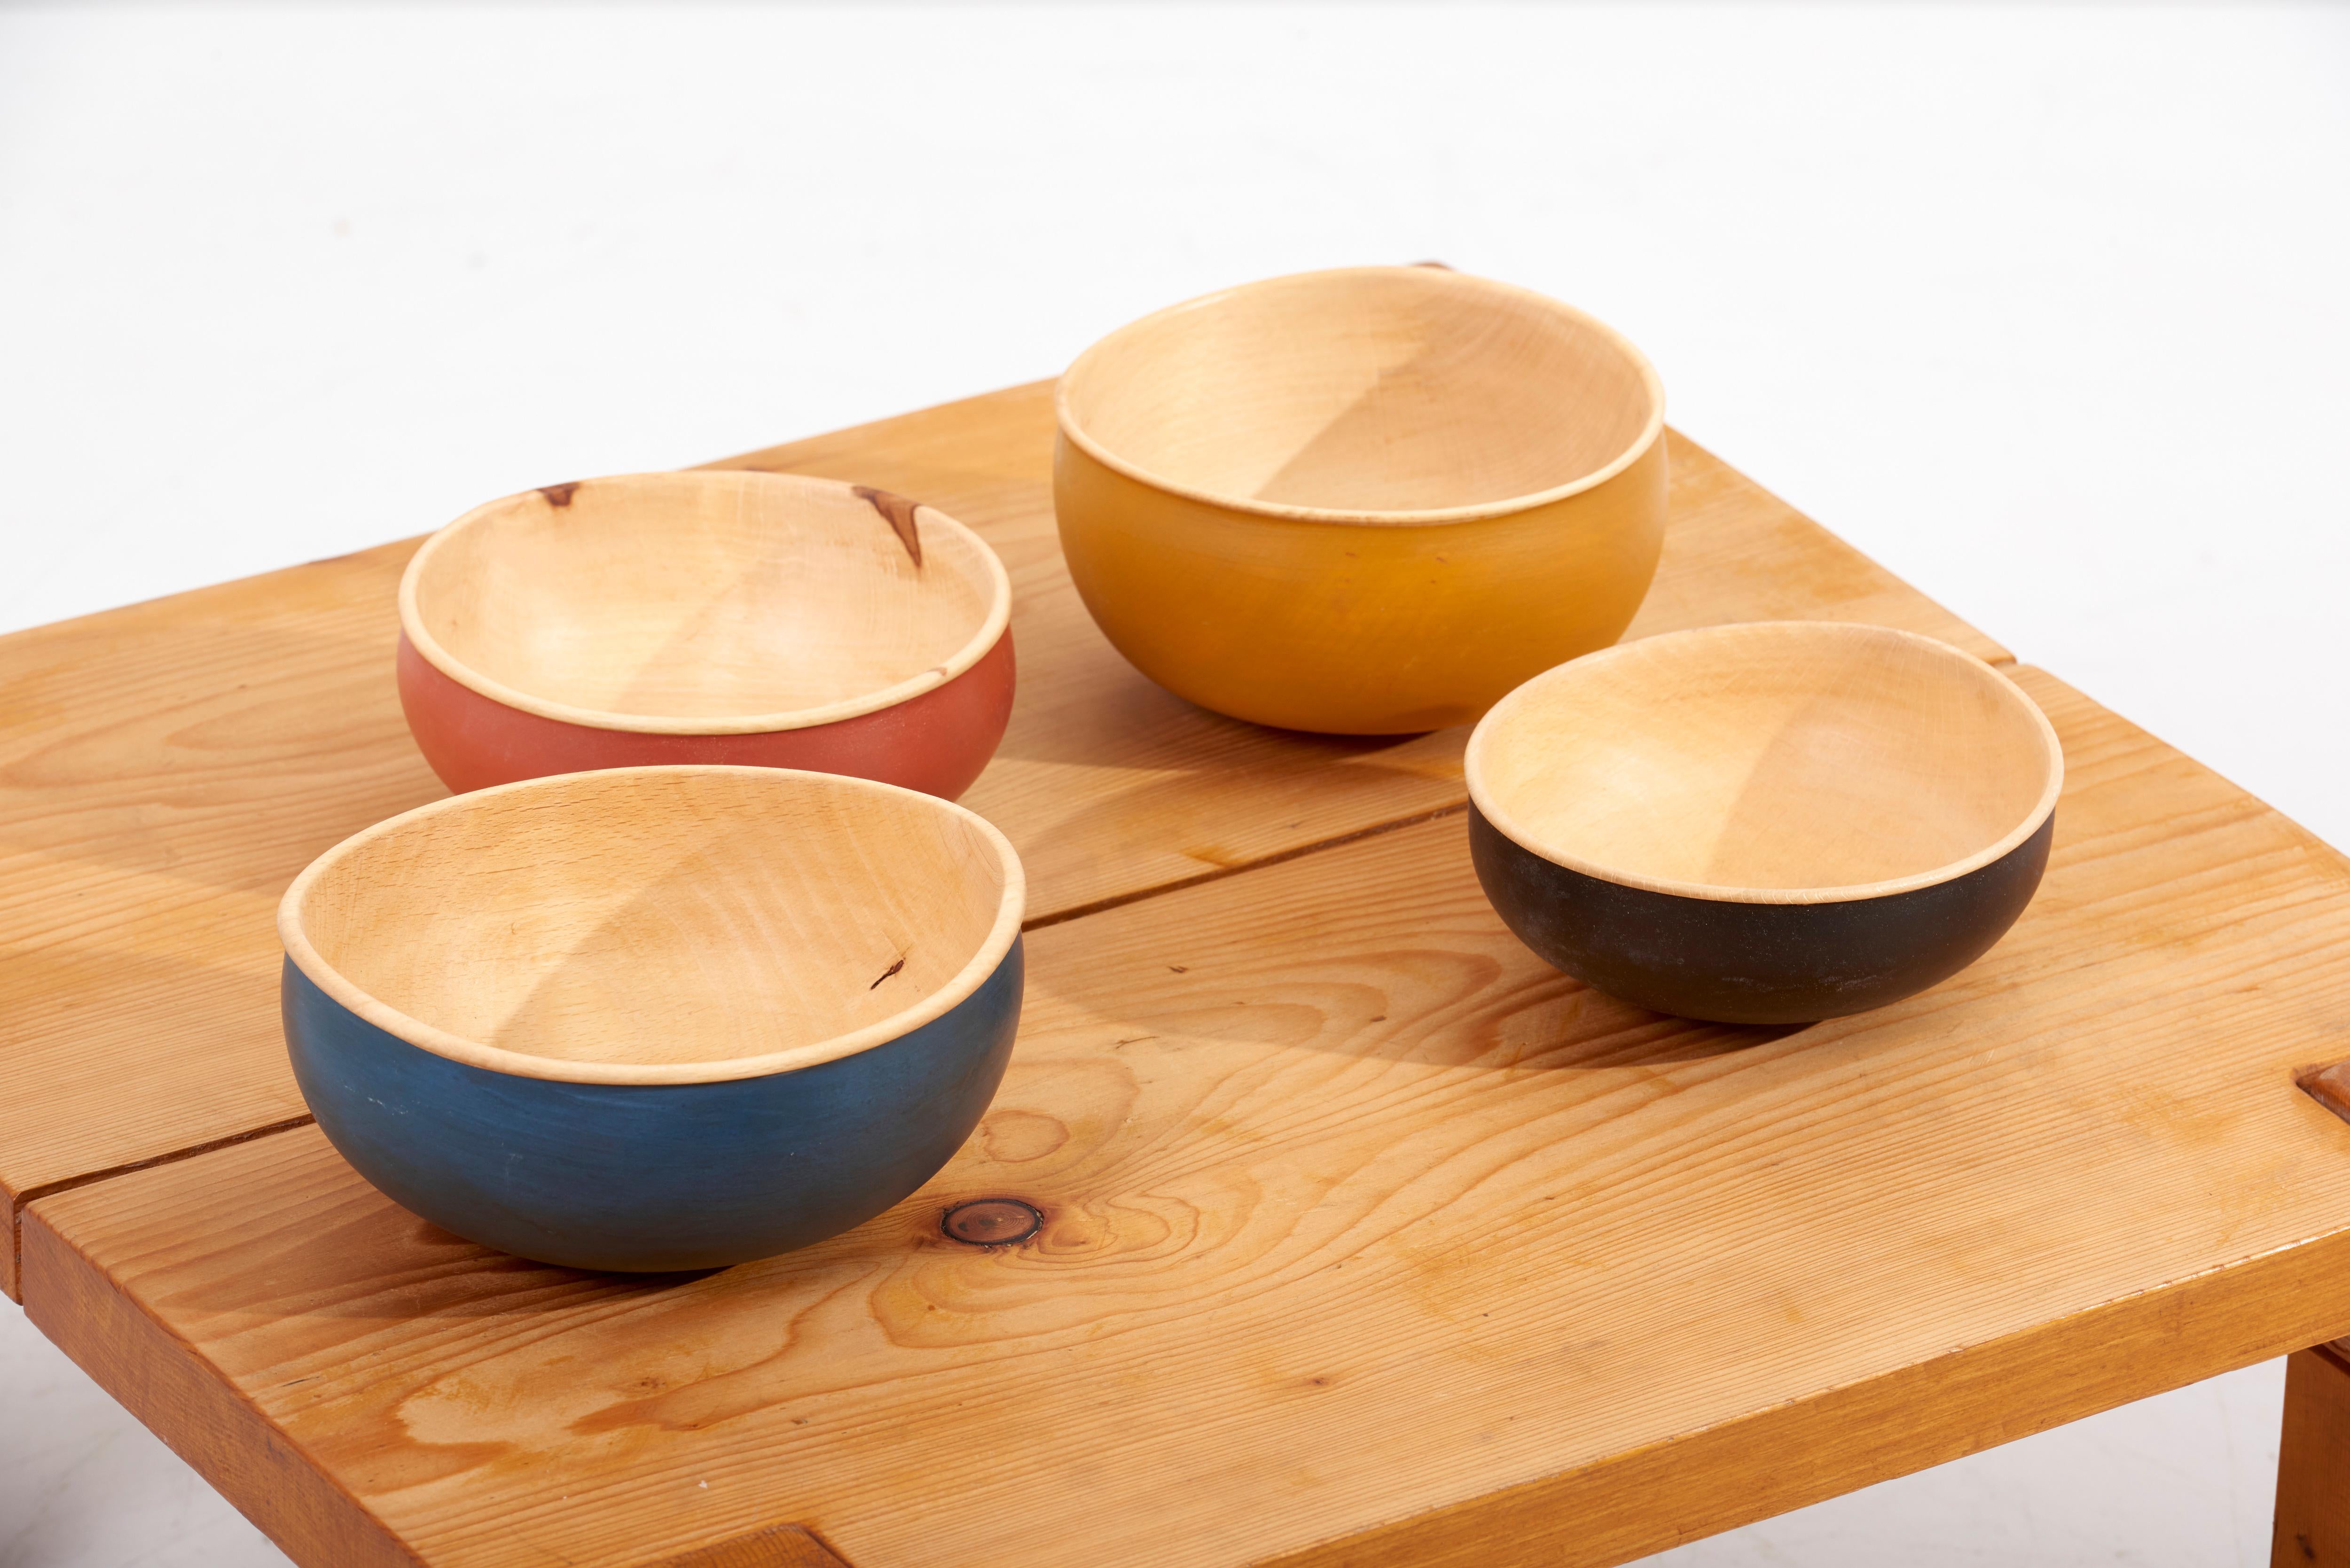 Arts and Crafts Set of 4 Wooden Bowls by Fabian Fischer, Germany, 2020